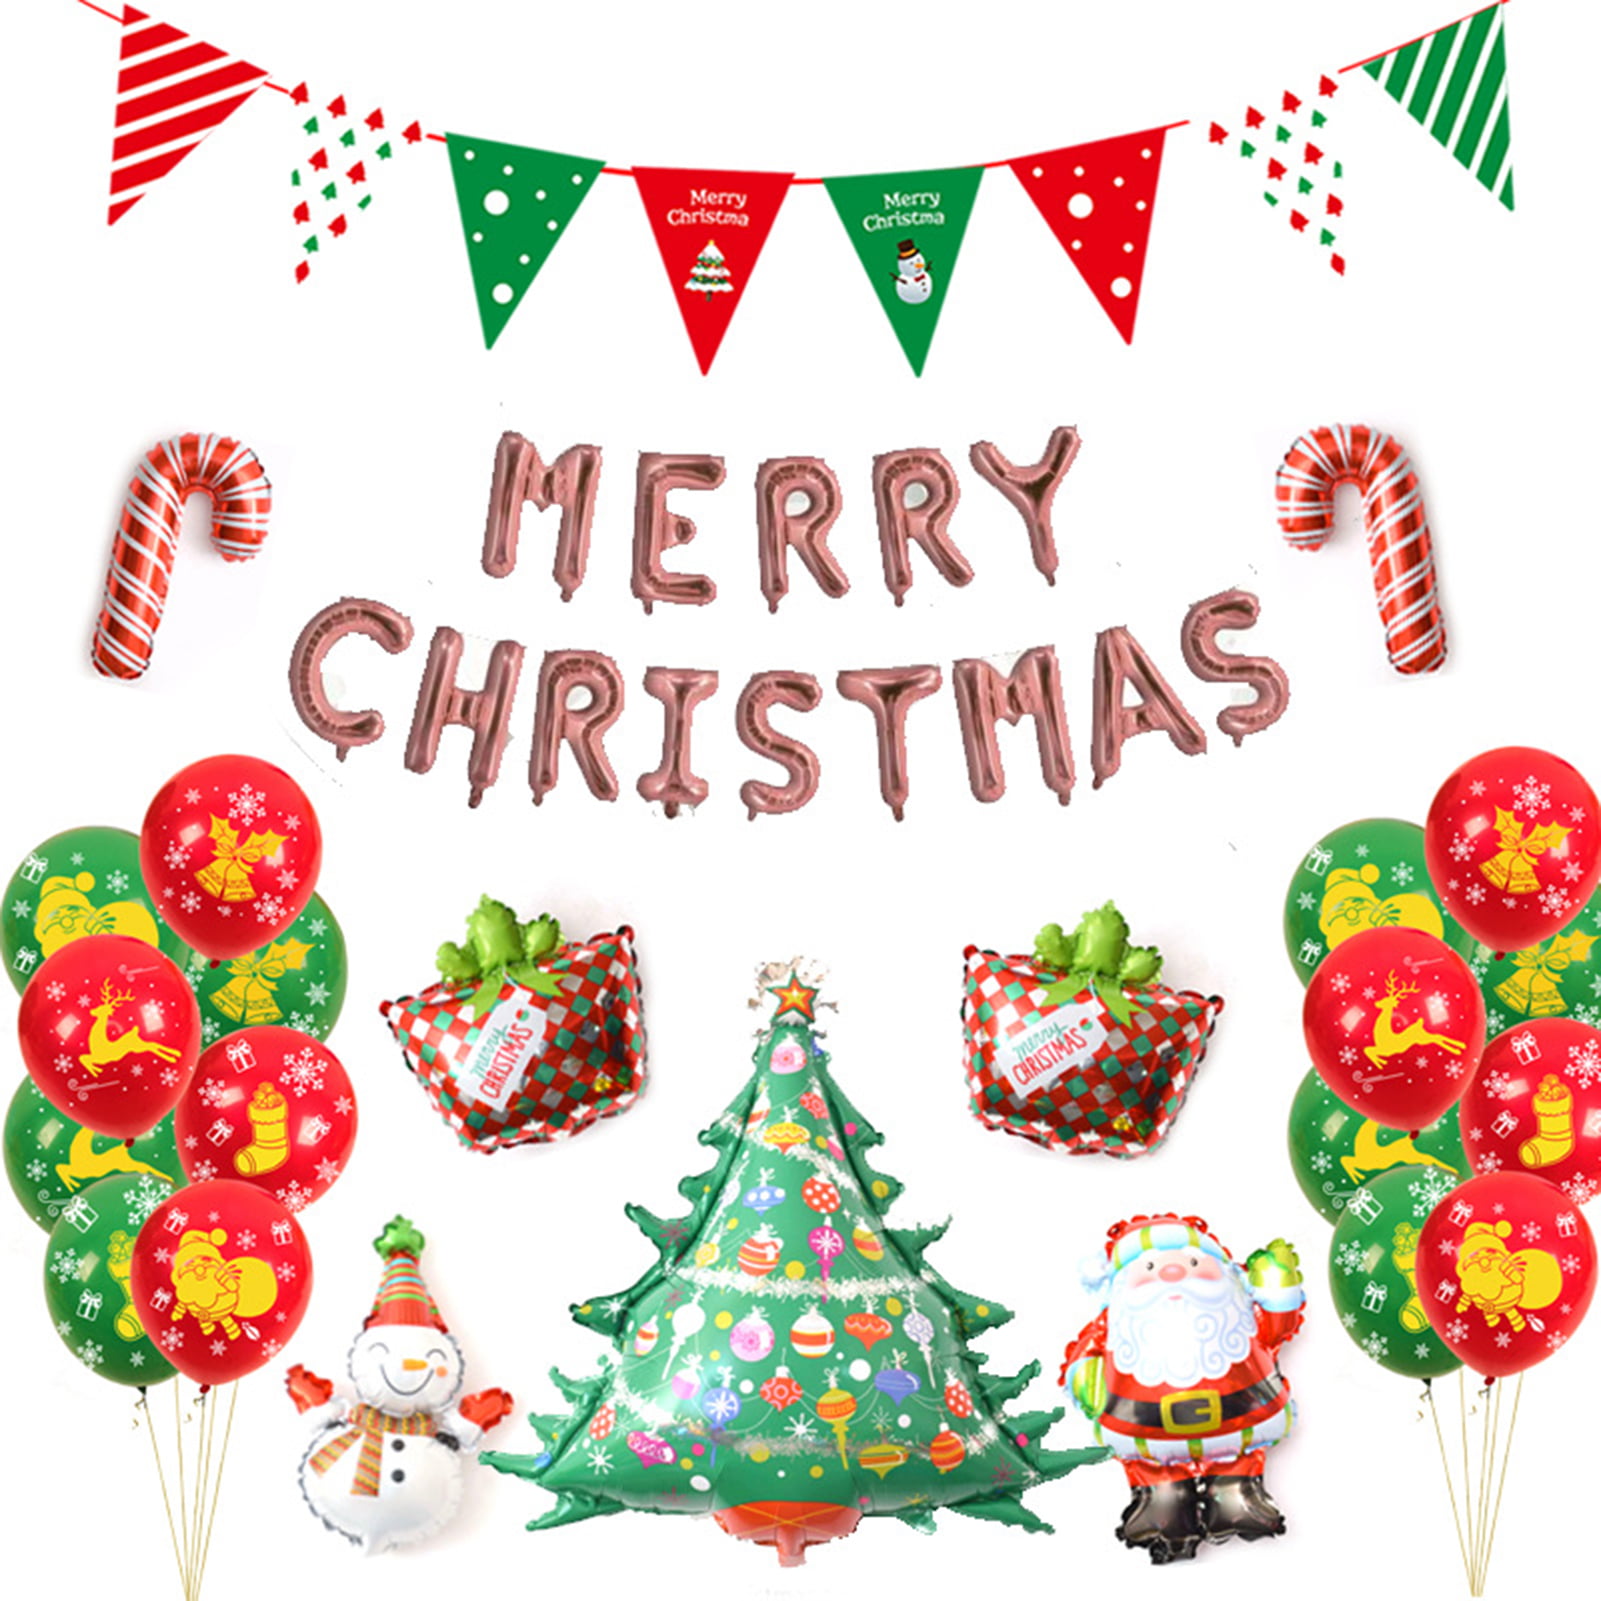 Details about   16 inch Foil Balloons Letter Combinations " MERRY CHRISTMAS " Party Decoration 